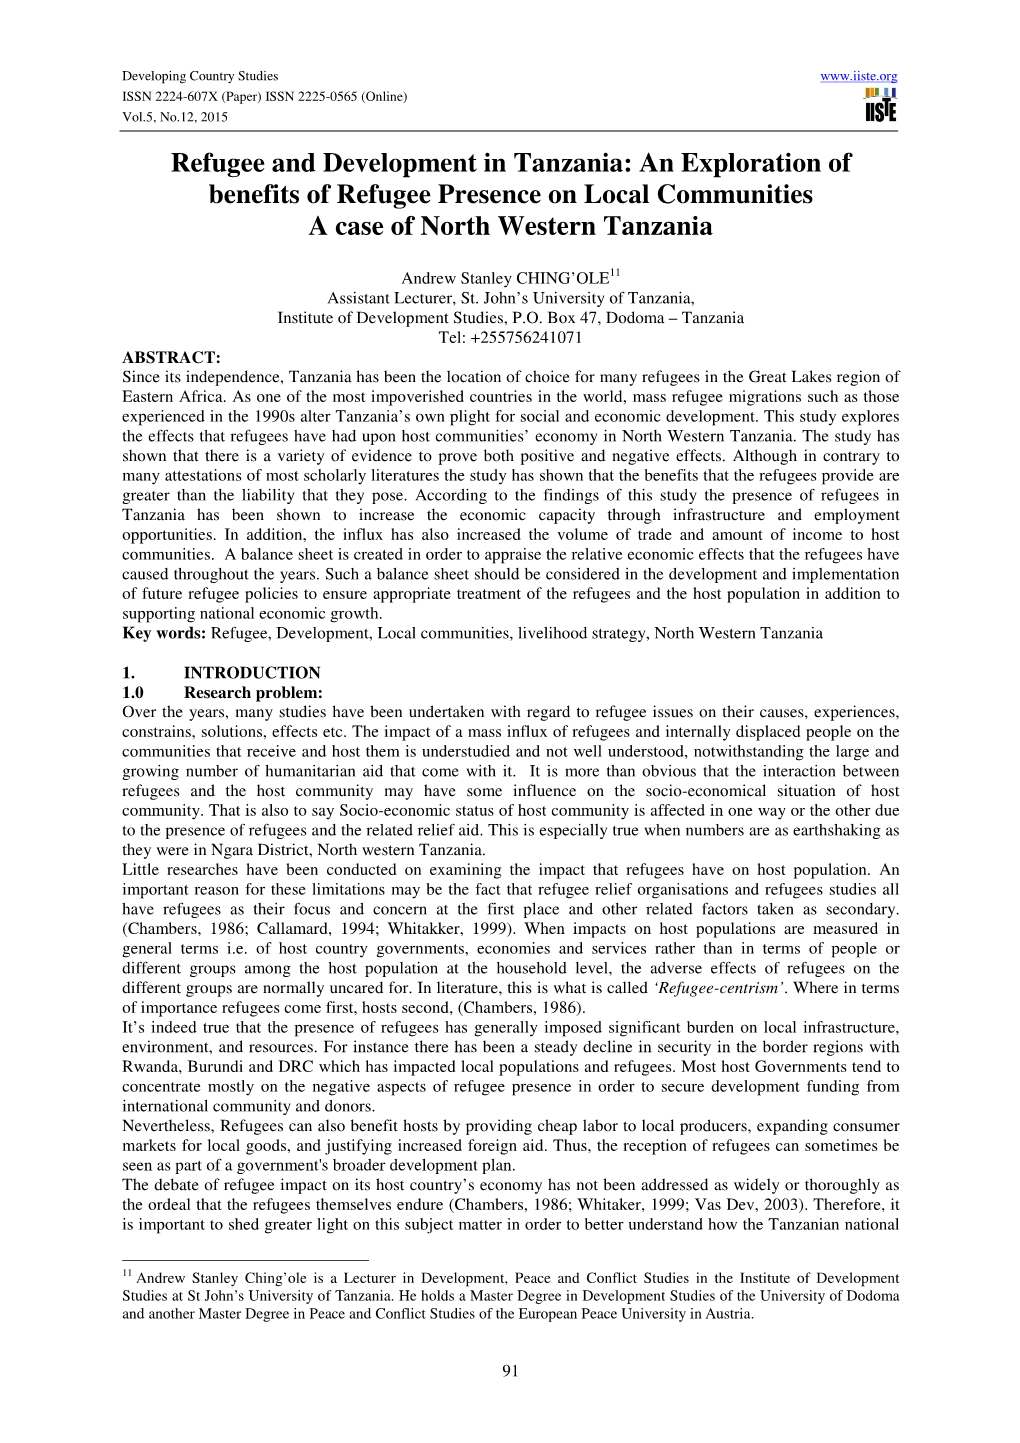 Refugee and Development in Tanzania: an Exploration of Benefits of Refugee Presence on Local Communities a Case of North Western Tanzania